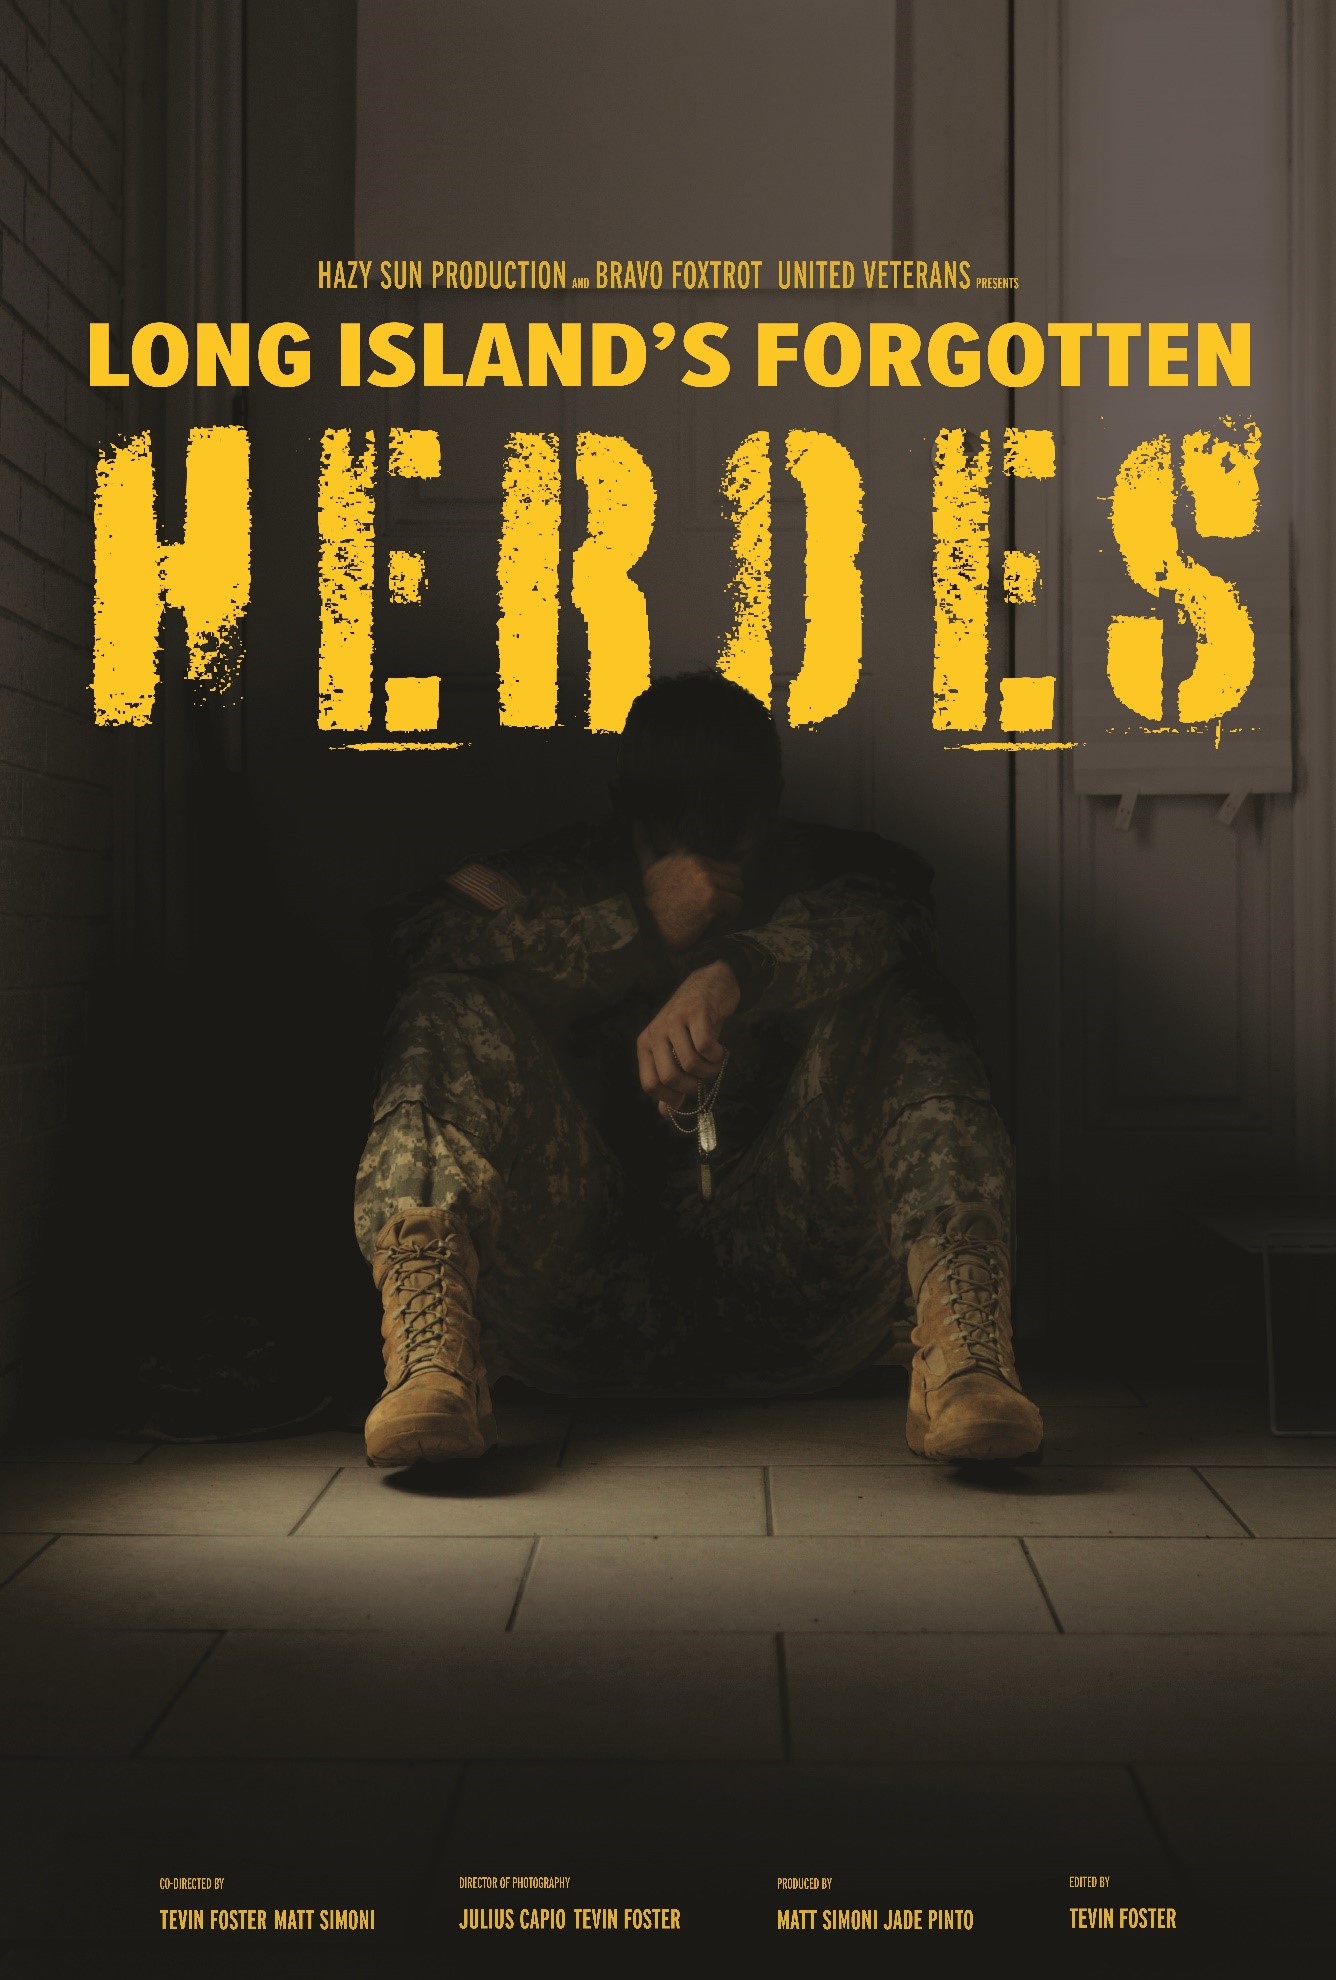 Film poster for LONG ISLAND